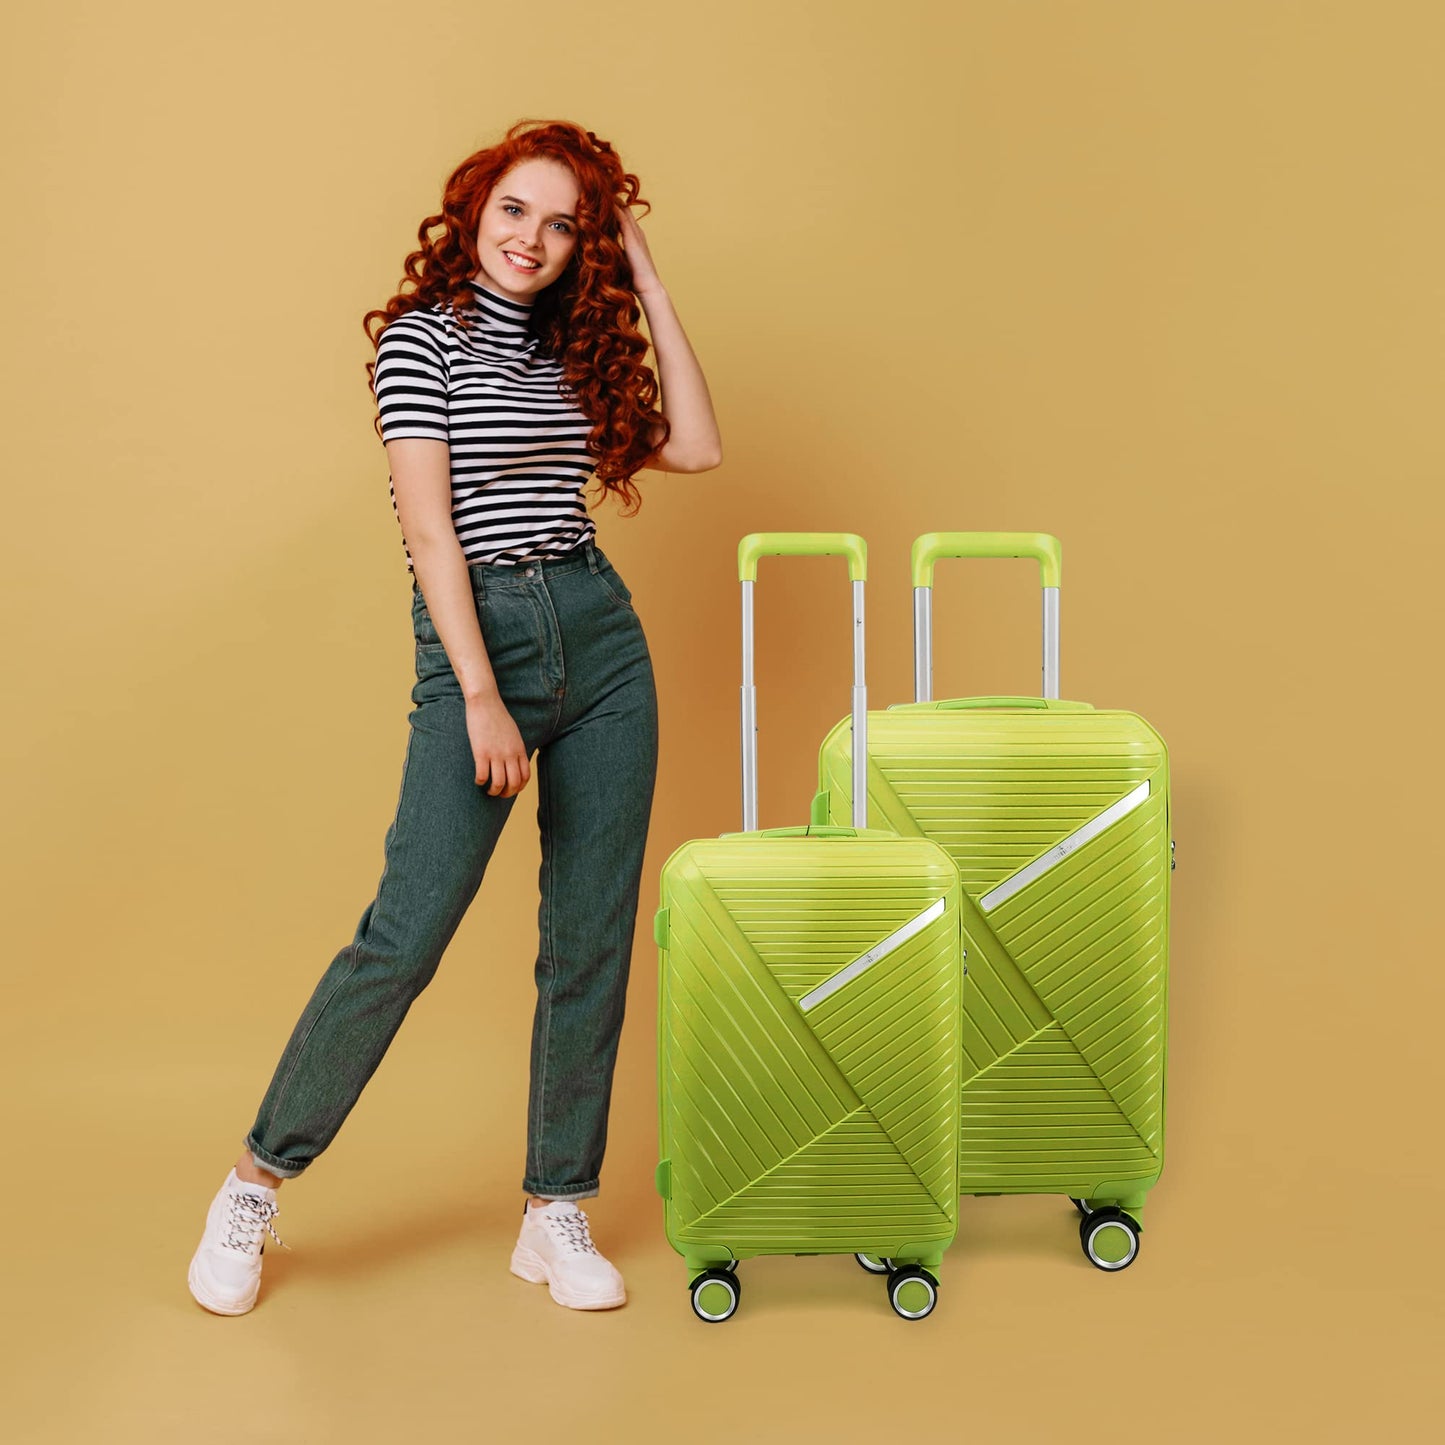 THE CLOWNFISH Combo of 2 Denzel Series Luggage Polypropylene Hard Case Suitcases Eight Wheel Trolley Bags with TSA Lock- Green Medium 66 cm-26 inch Small 56 cm-22 inch